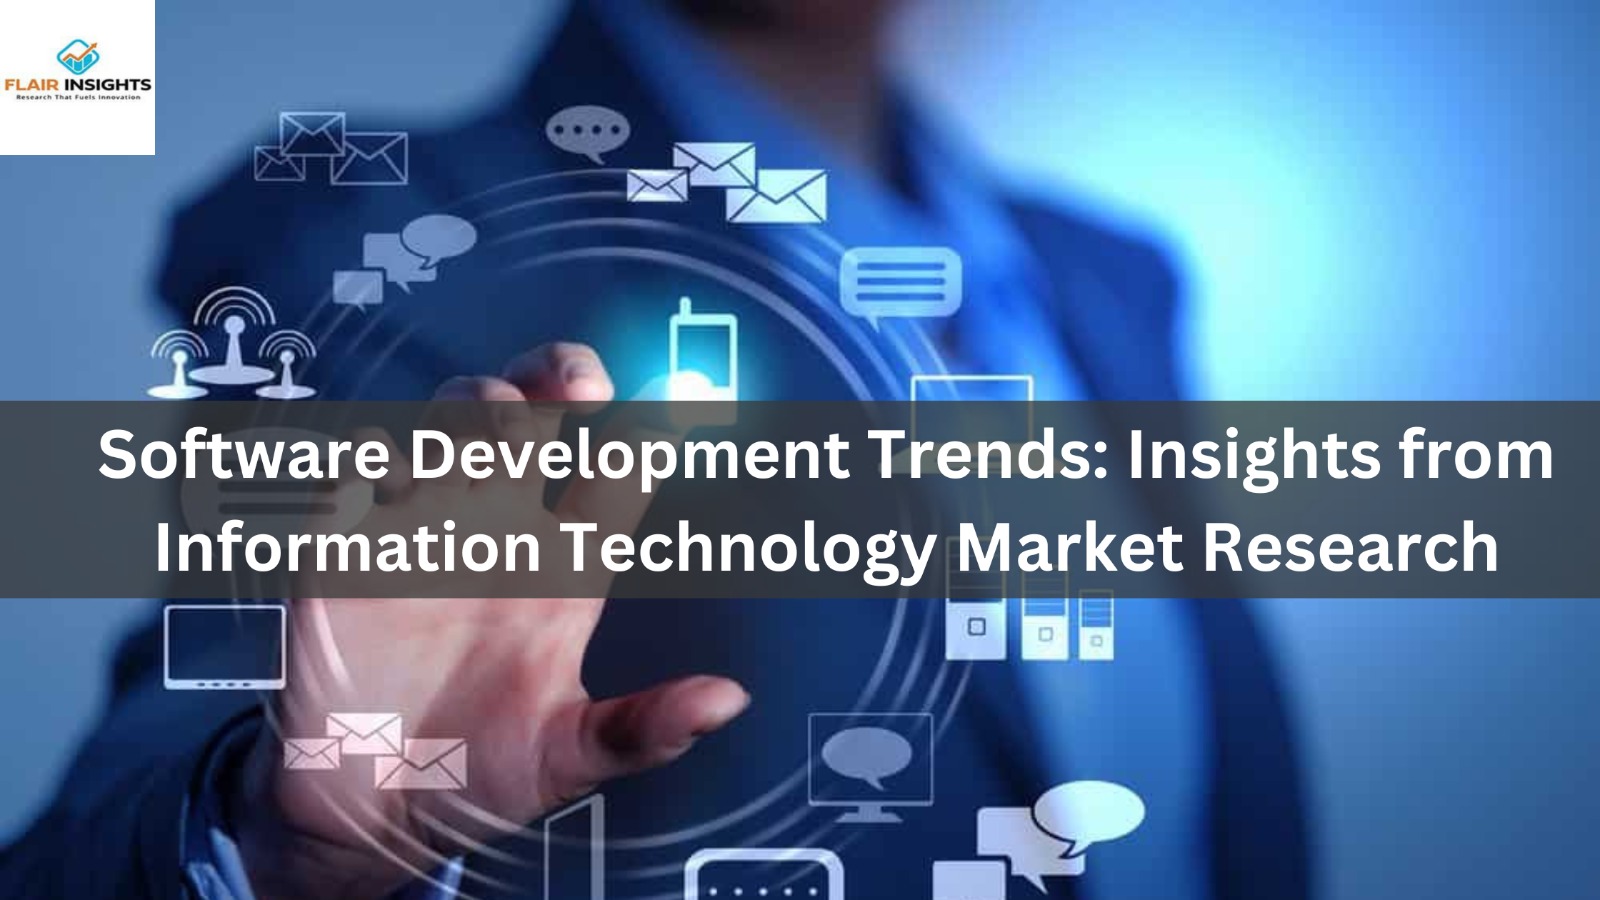 Software Development Trends: Insights from Information Technology Market Research